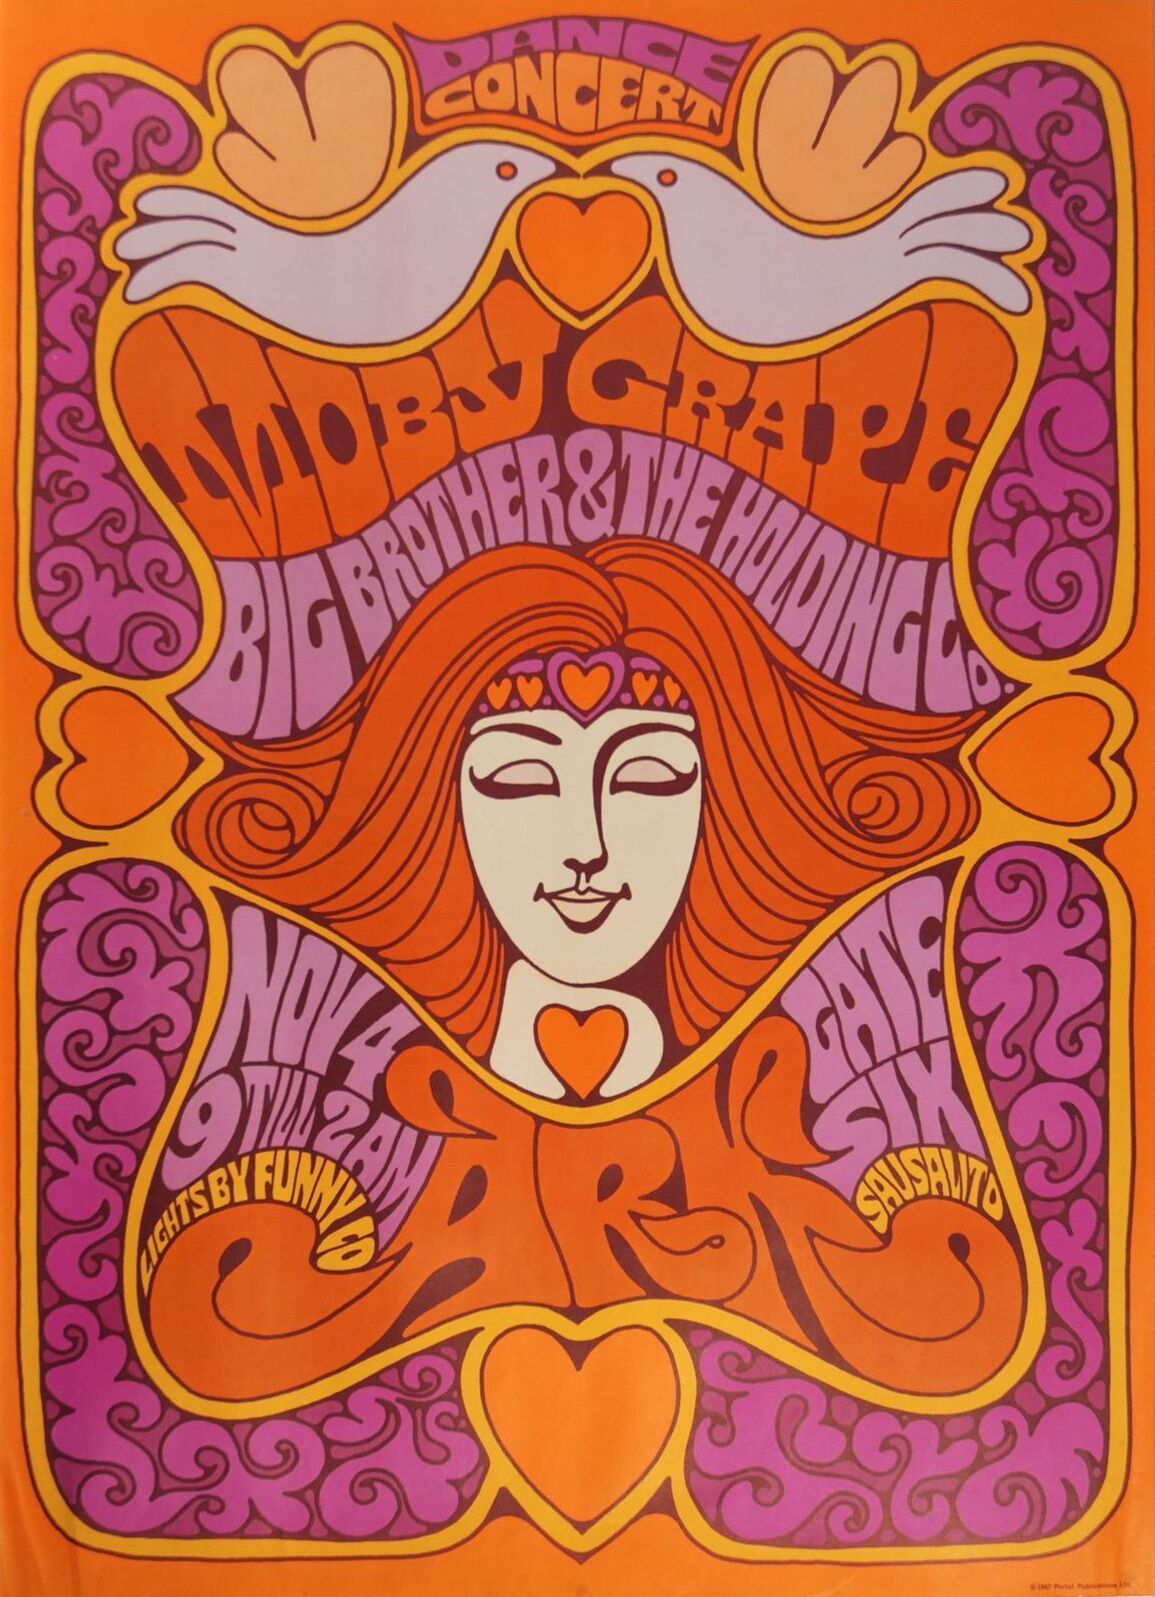 Big Brother & Moby Grape The Ark 1967 Concert Poster